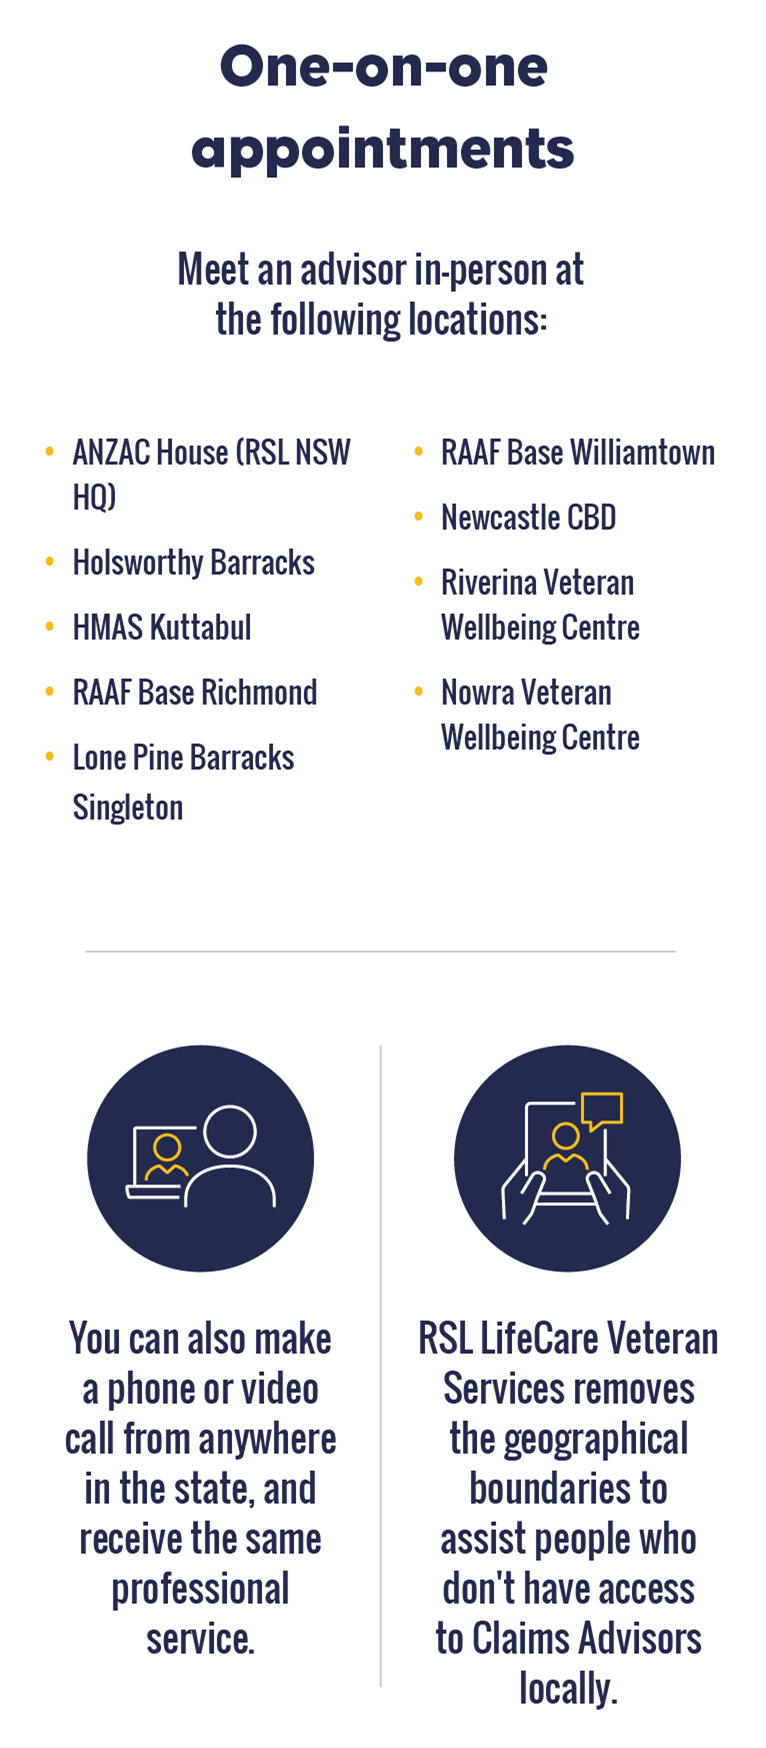 One-on-one appointments. Meet a Claims Advisor in-person at the following locations: ANZAC House (RSL NSW HQ), Holsworthy Barracks, HMAS Kuttabul, RAAF Base Richmond, Lone Pine Barracks Singleton, RAAF Base Williamtown, Newcastle CBD, Riverina Veteran Wellbeing Centre, Nowra Veteran Wellbeing Centre. You can also make a phone or video call from anywhere in the state, and receive the same professional service, “We remove the geographical boundaries to assist people who don't have access to Claims Advisors locally.”